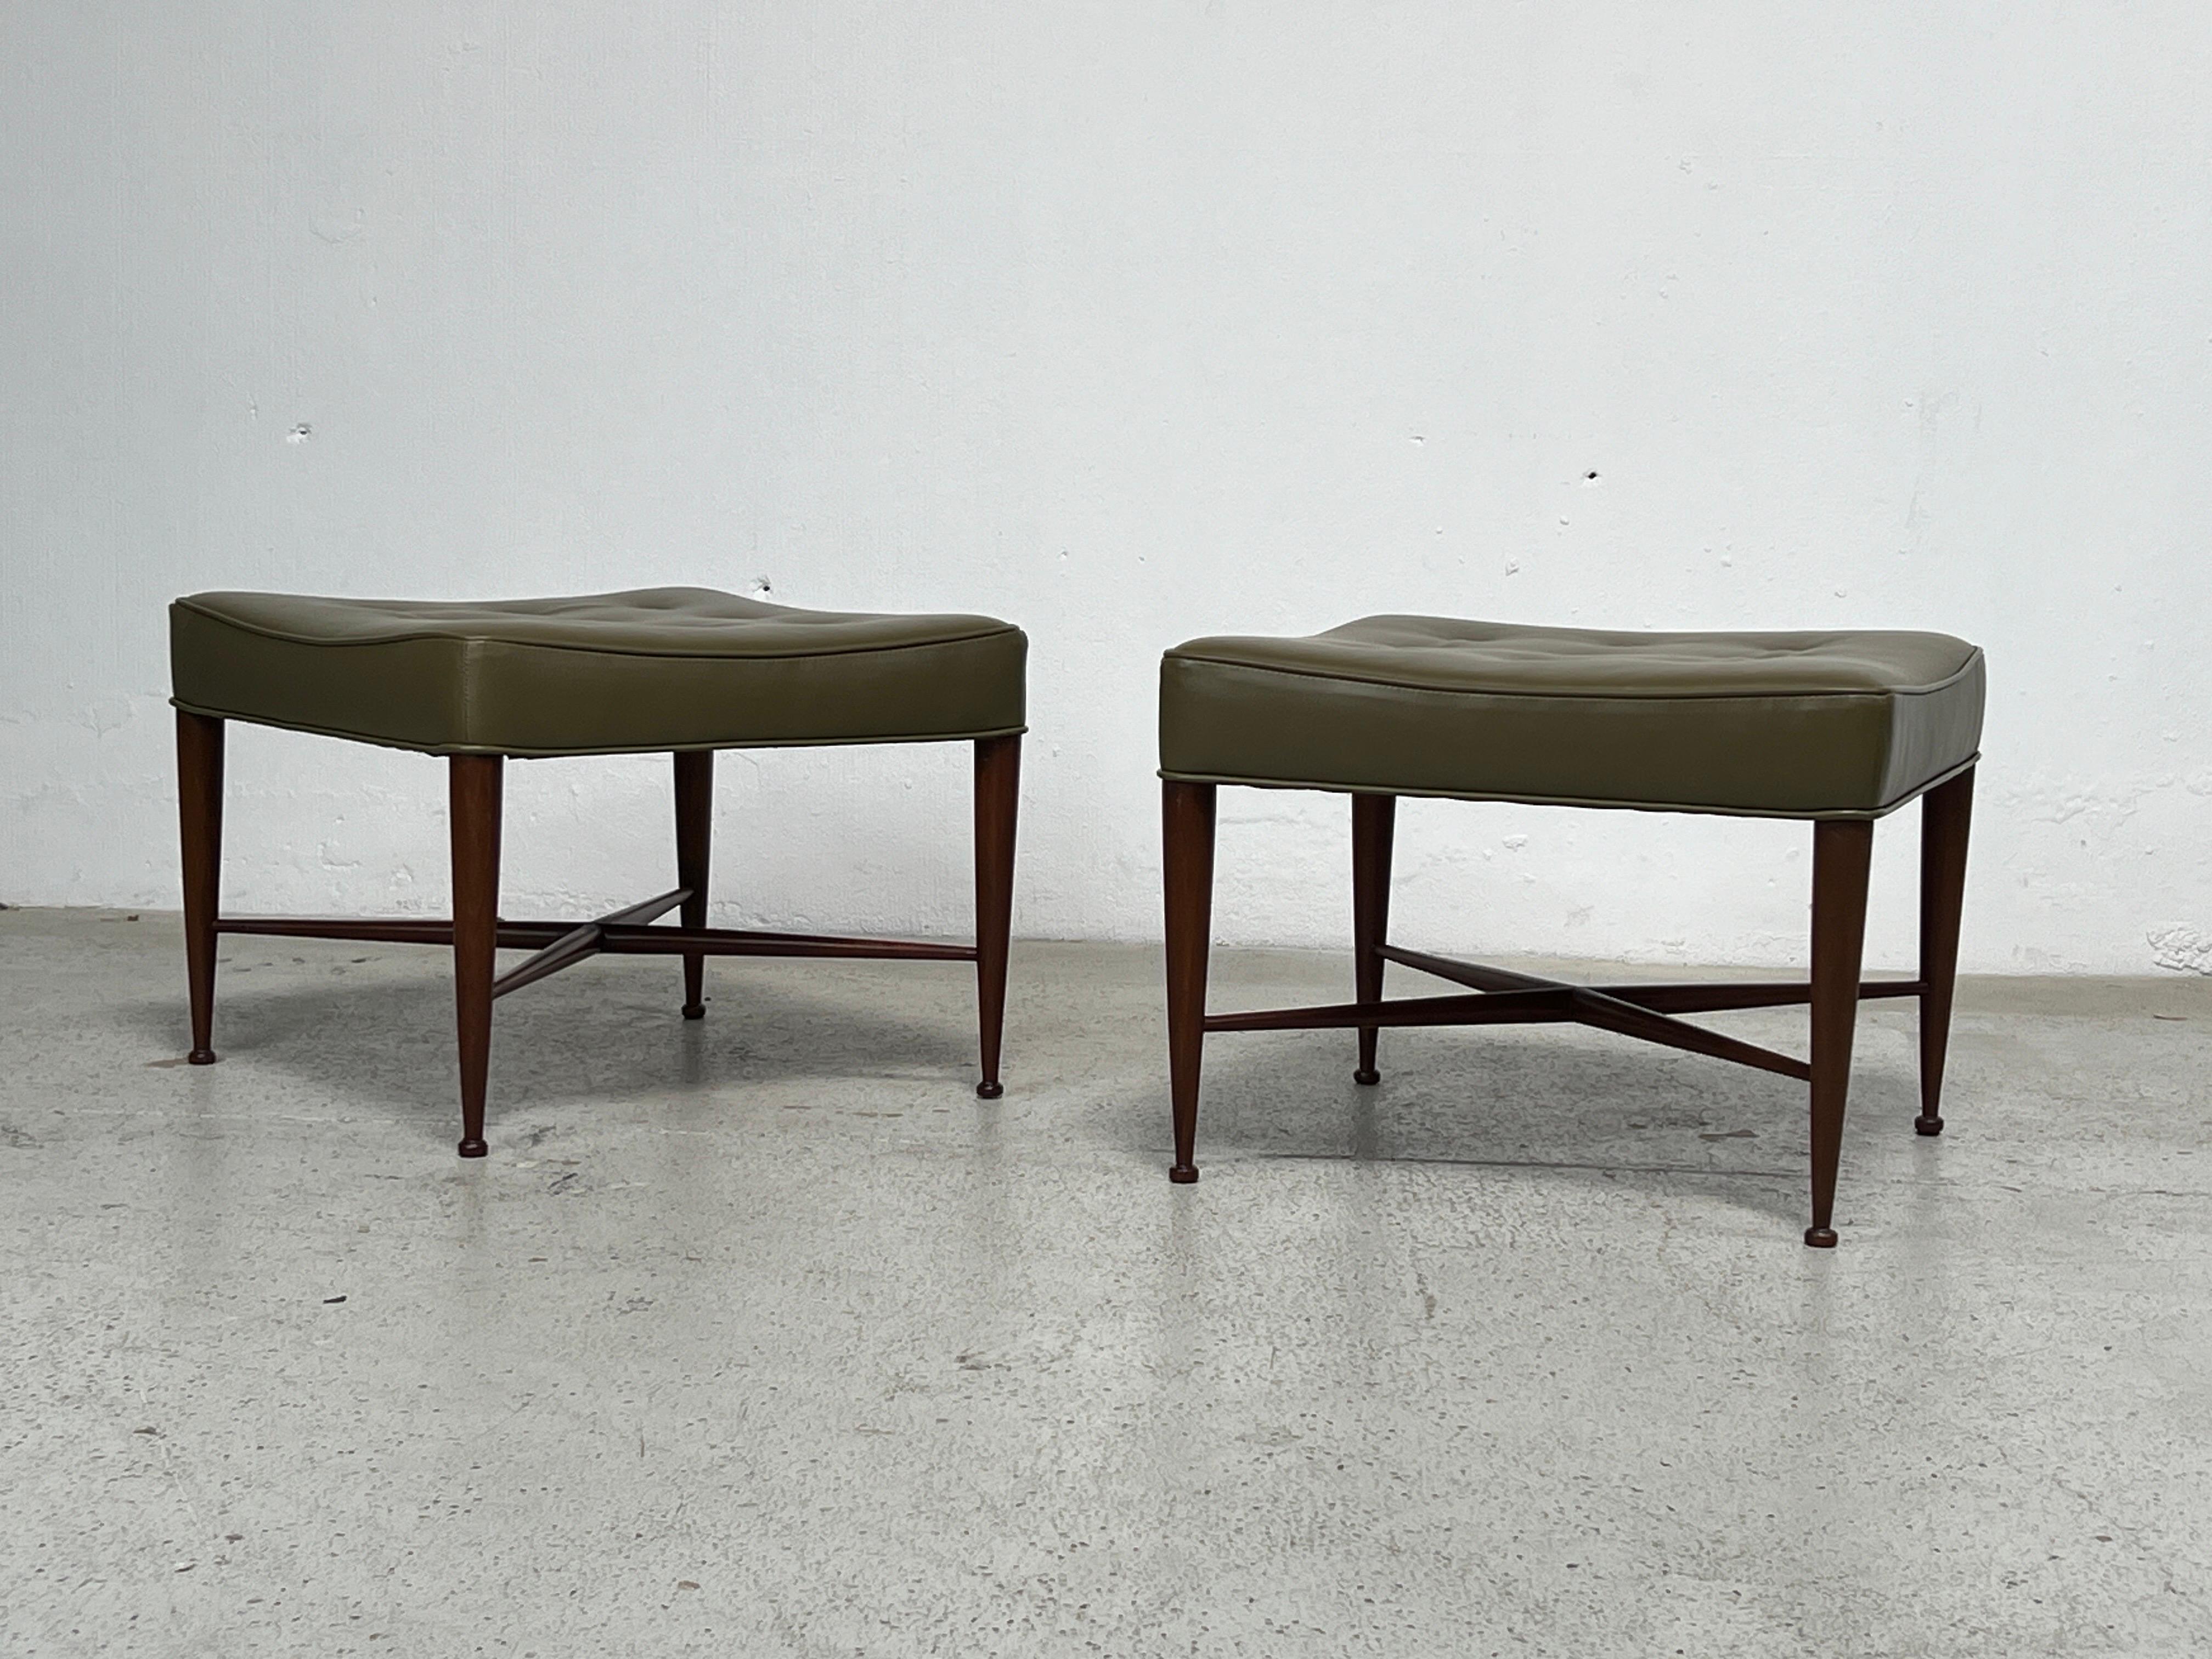 A pair of mahogany and leather Thebes stools designed by Edward Wormley for Dunbar. Fully restored. 